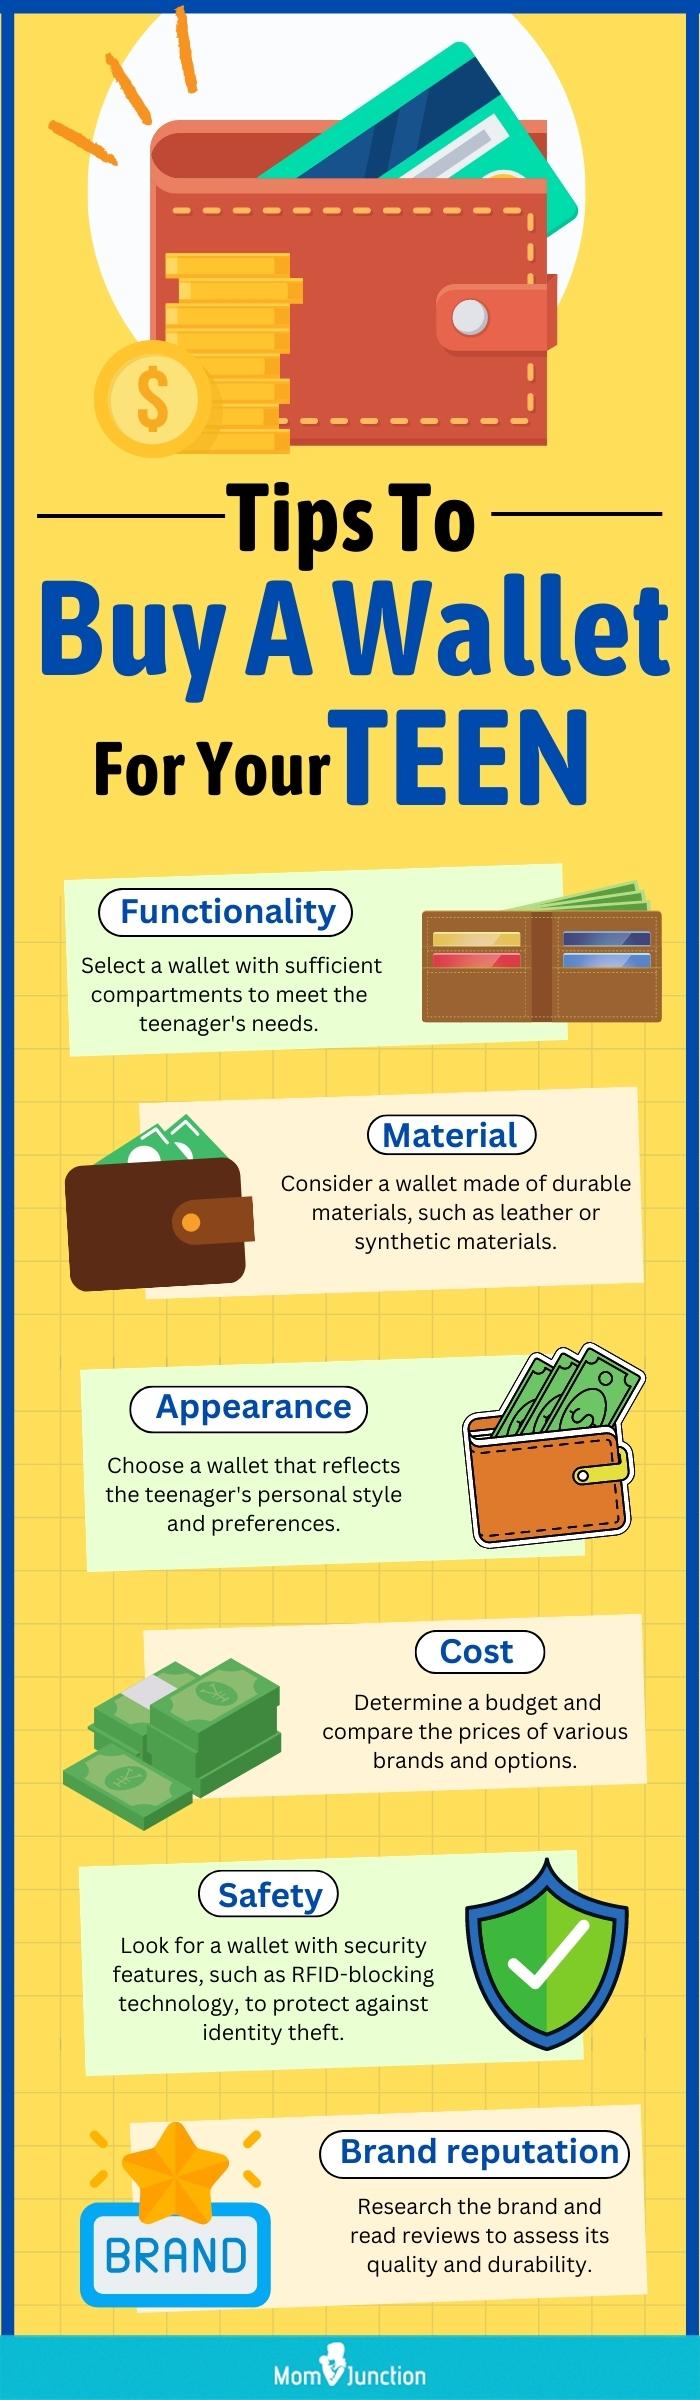 Tips To Buy A Wallet For Your Teen Row-27 content team (infographic)